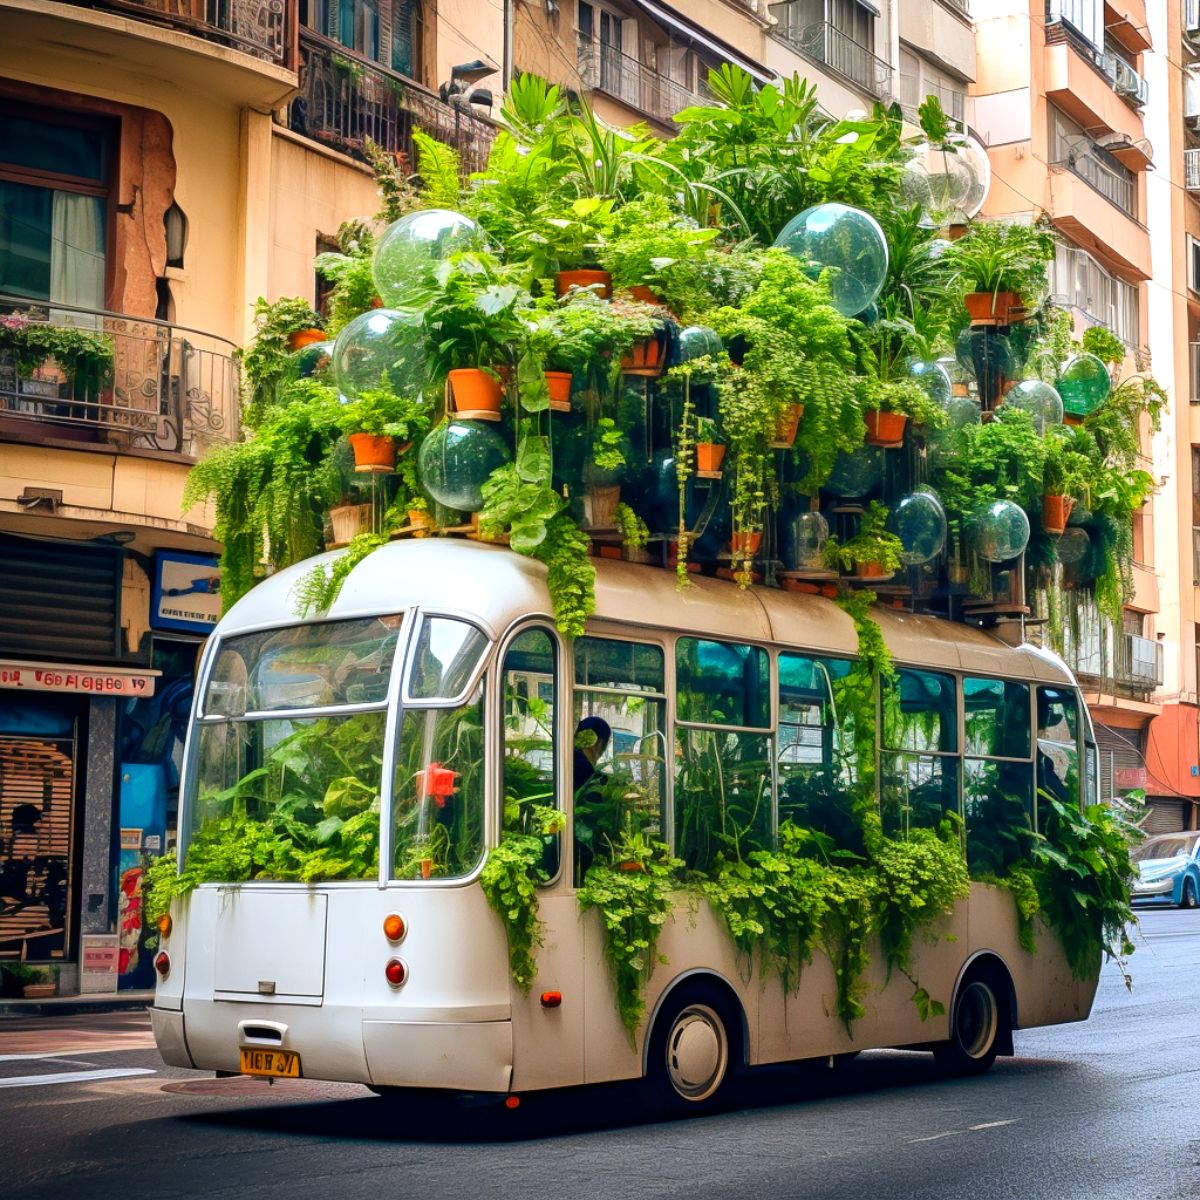 Greenhouse buses project by Emilio Alarcon